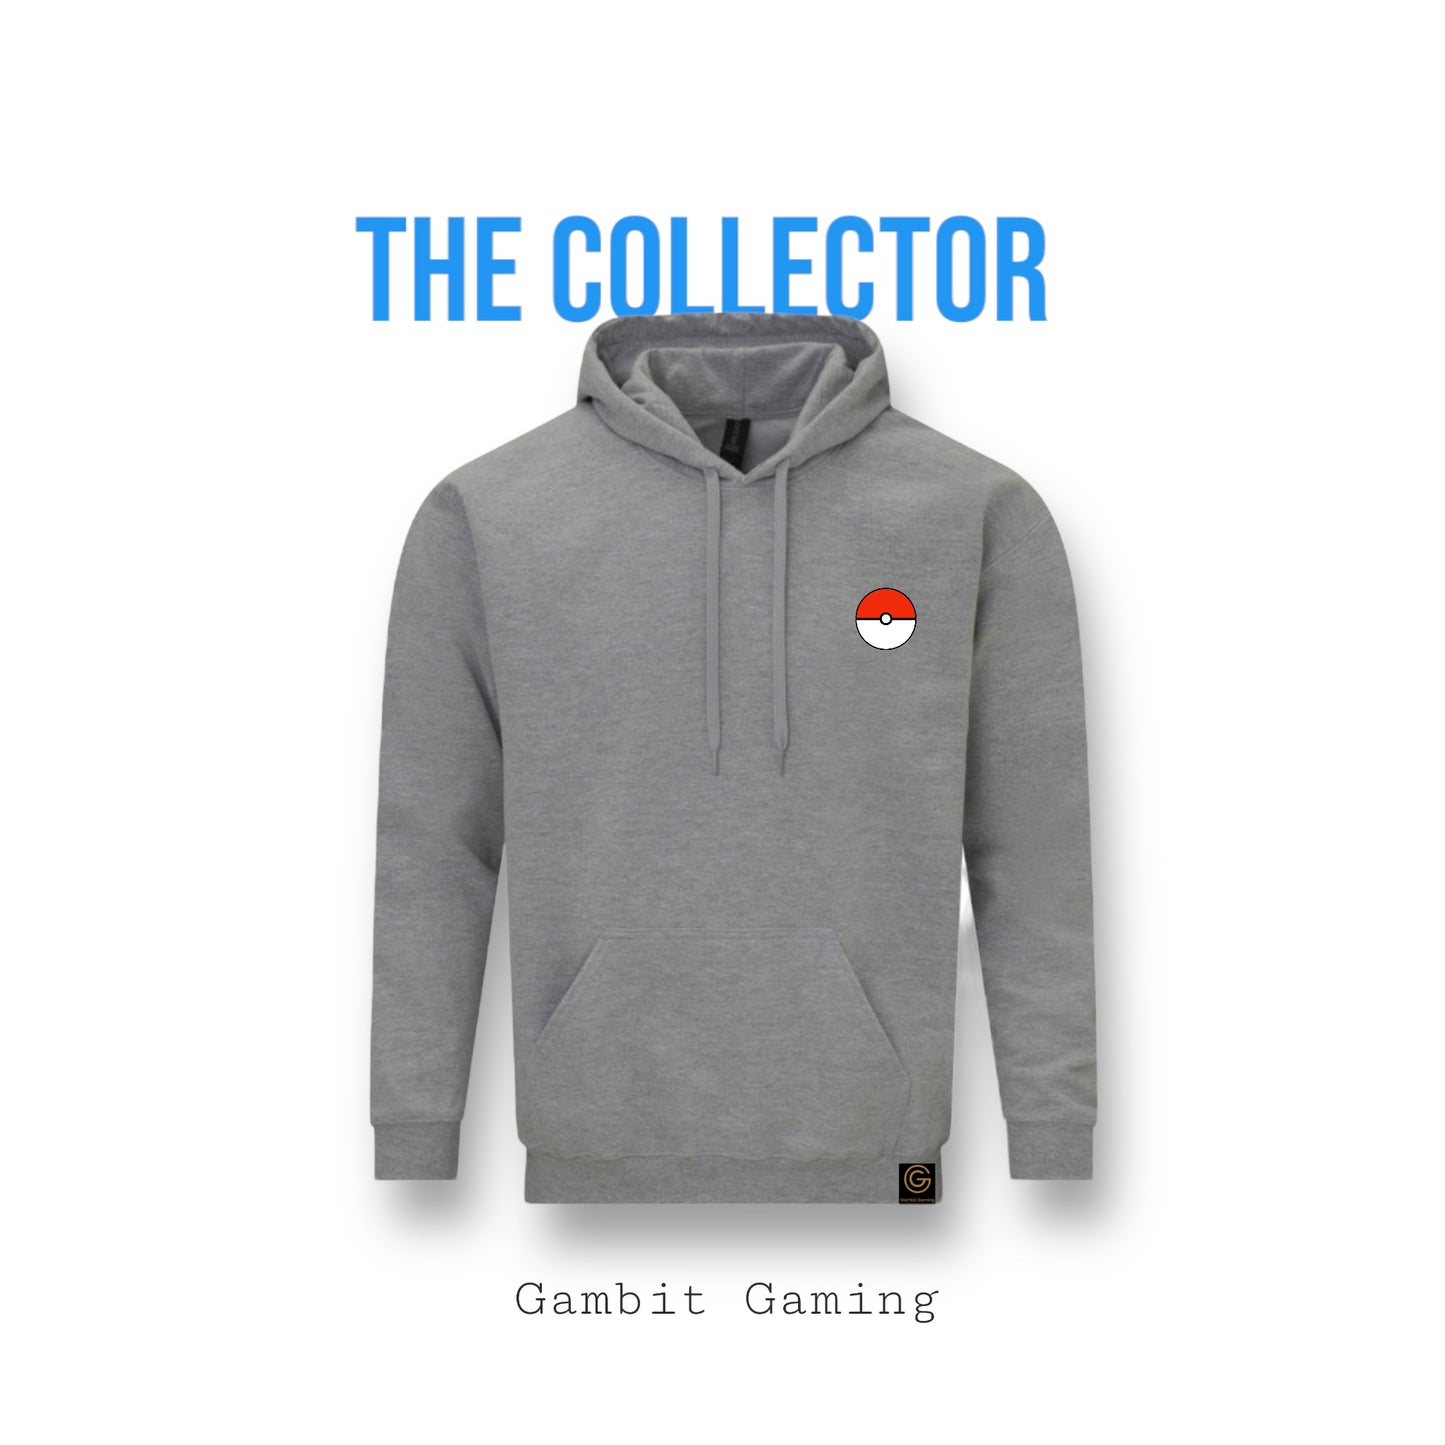 The Collector Hoodie - Gambit Gaming